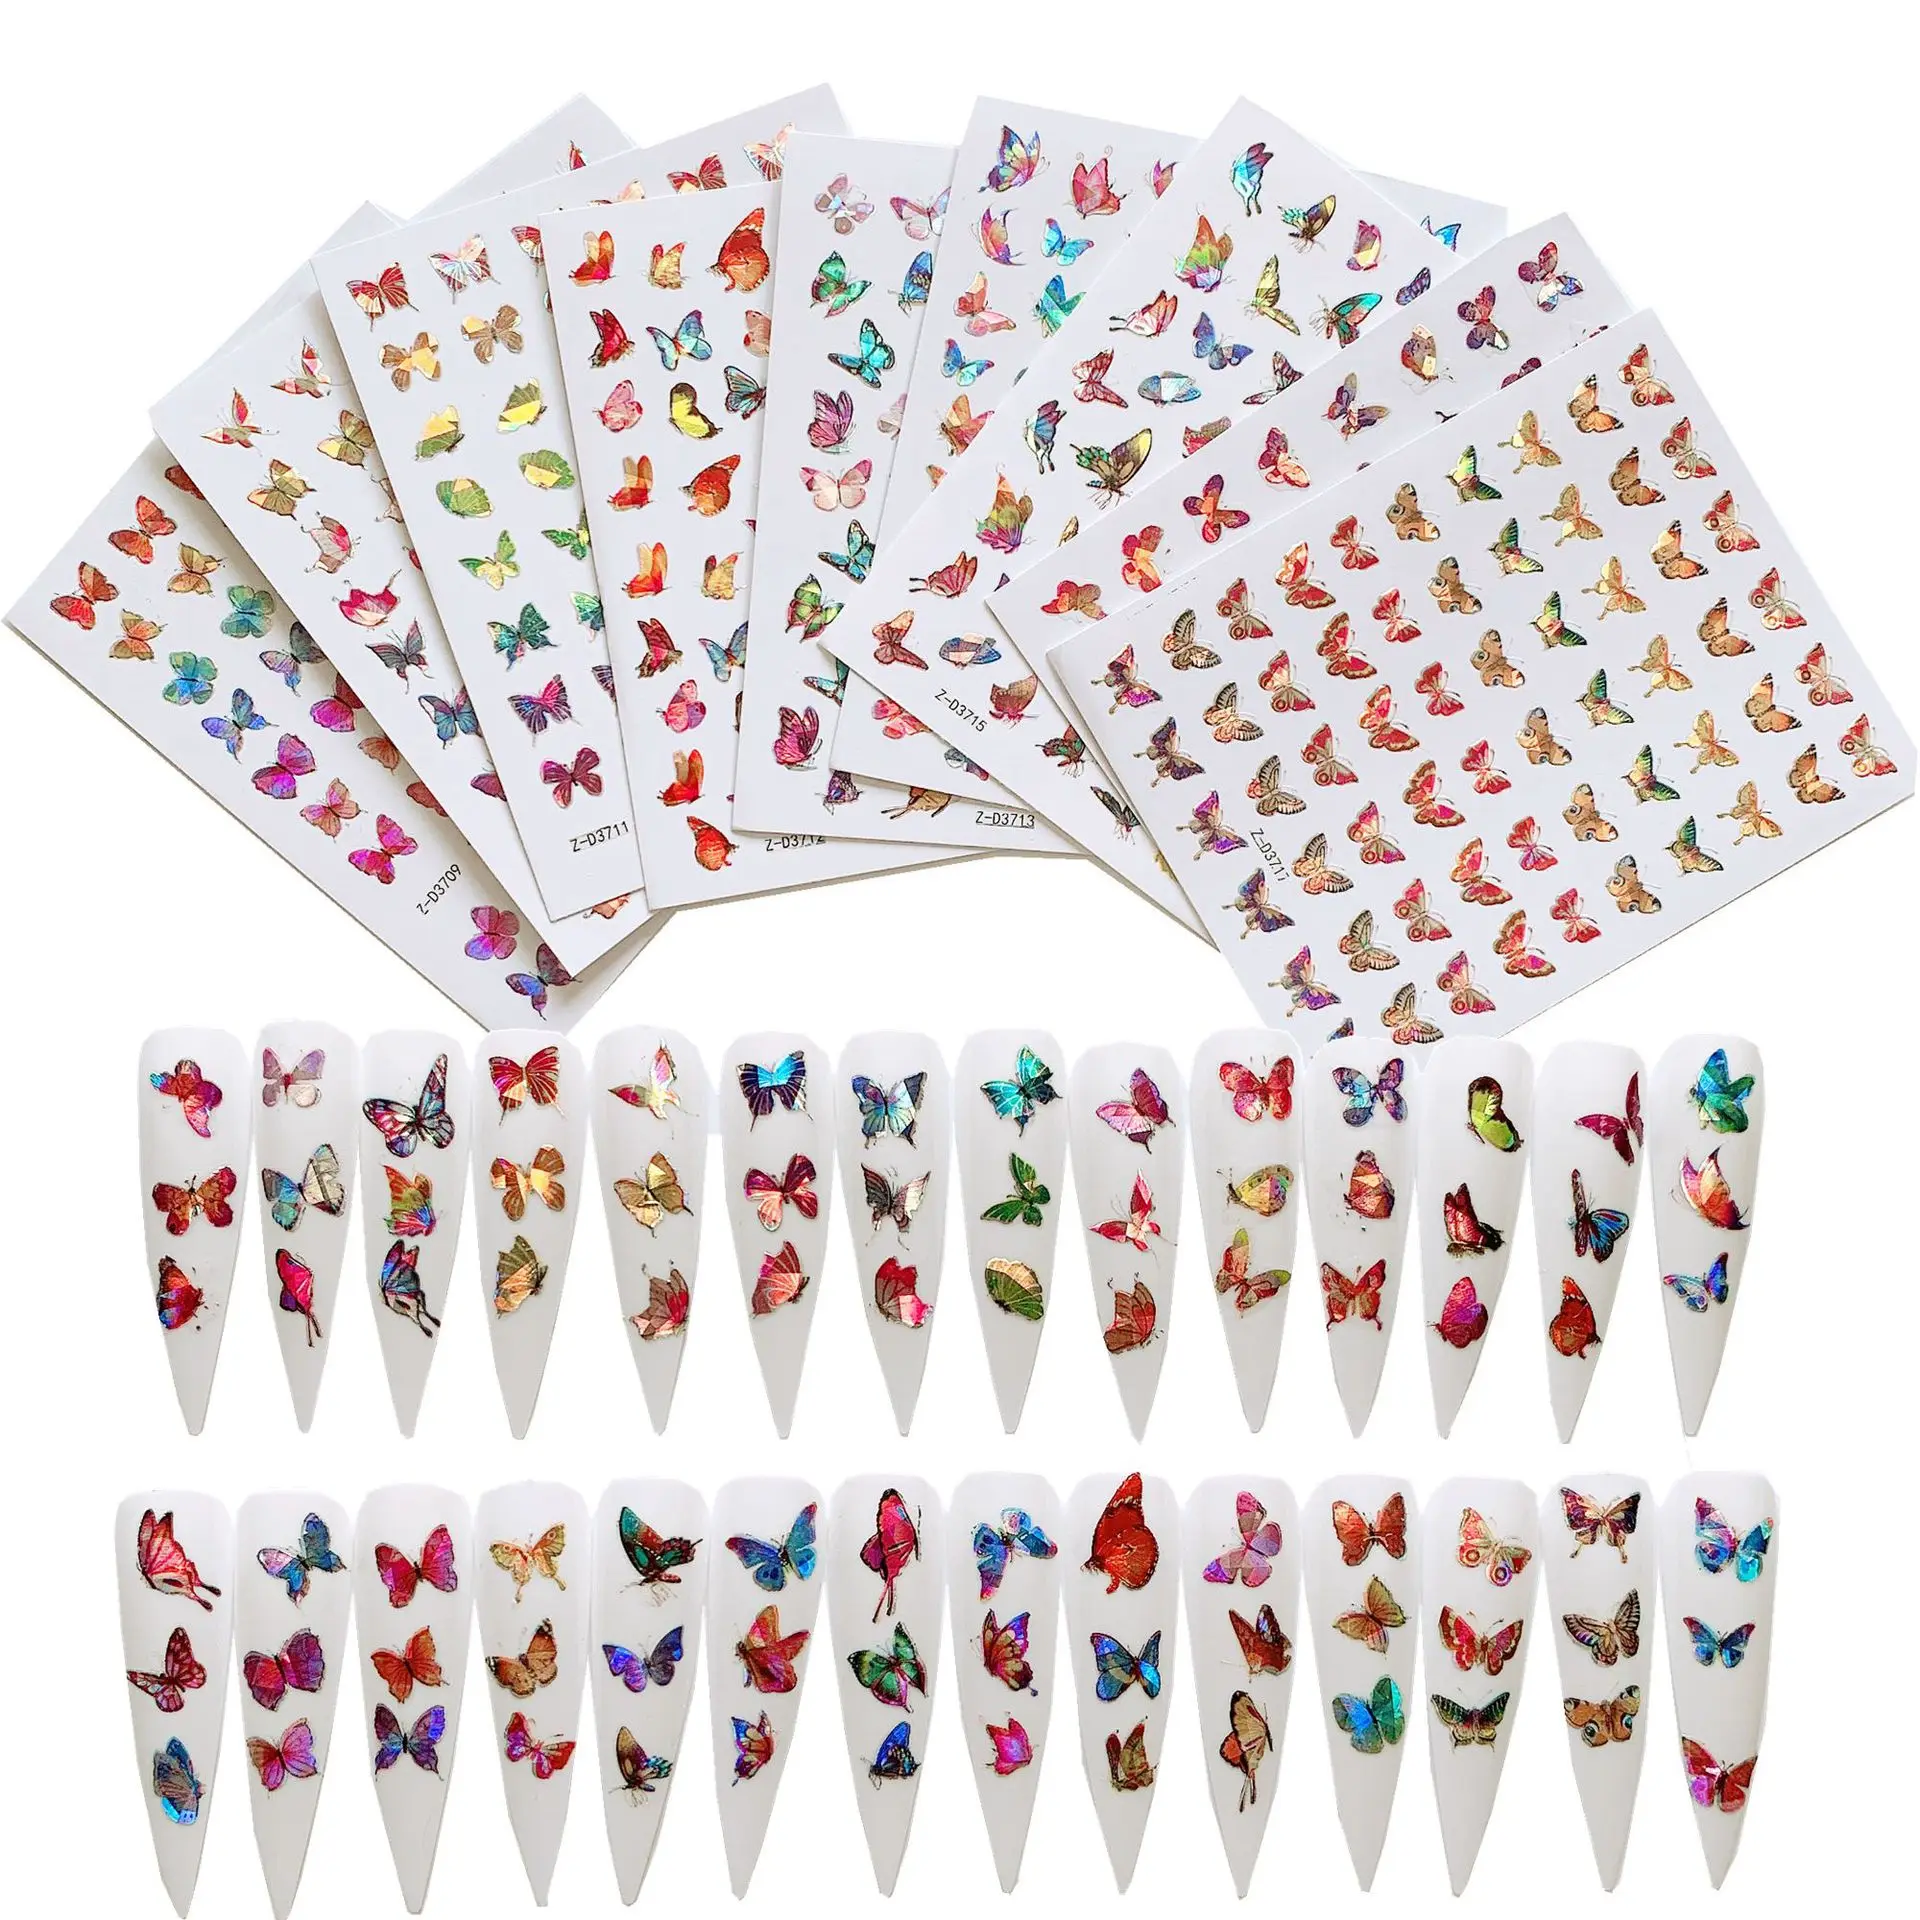 

2020 Holographic Nail Sticker Butterfly Design 3D Stickers for Nails, Mixed color